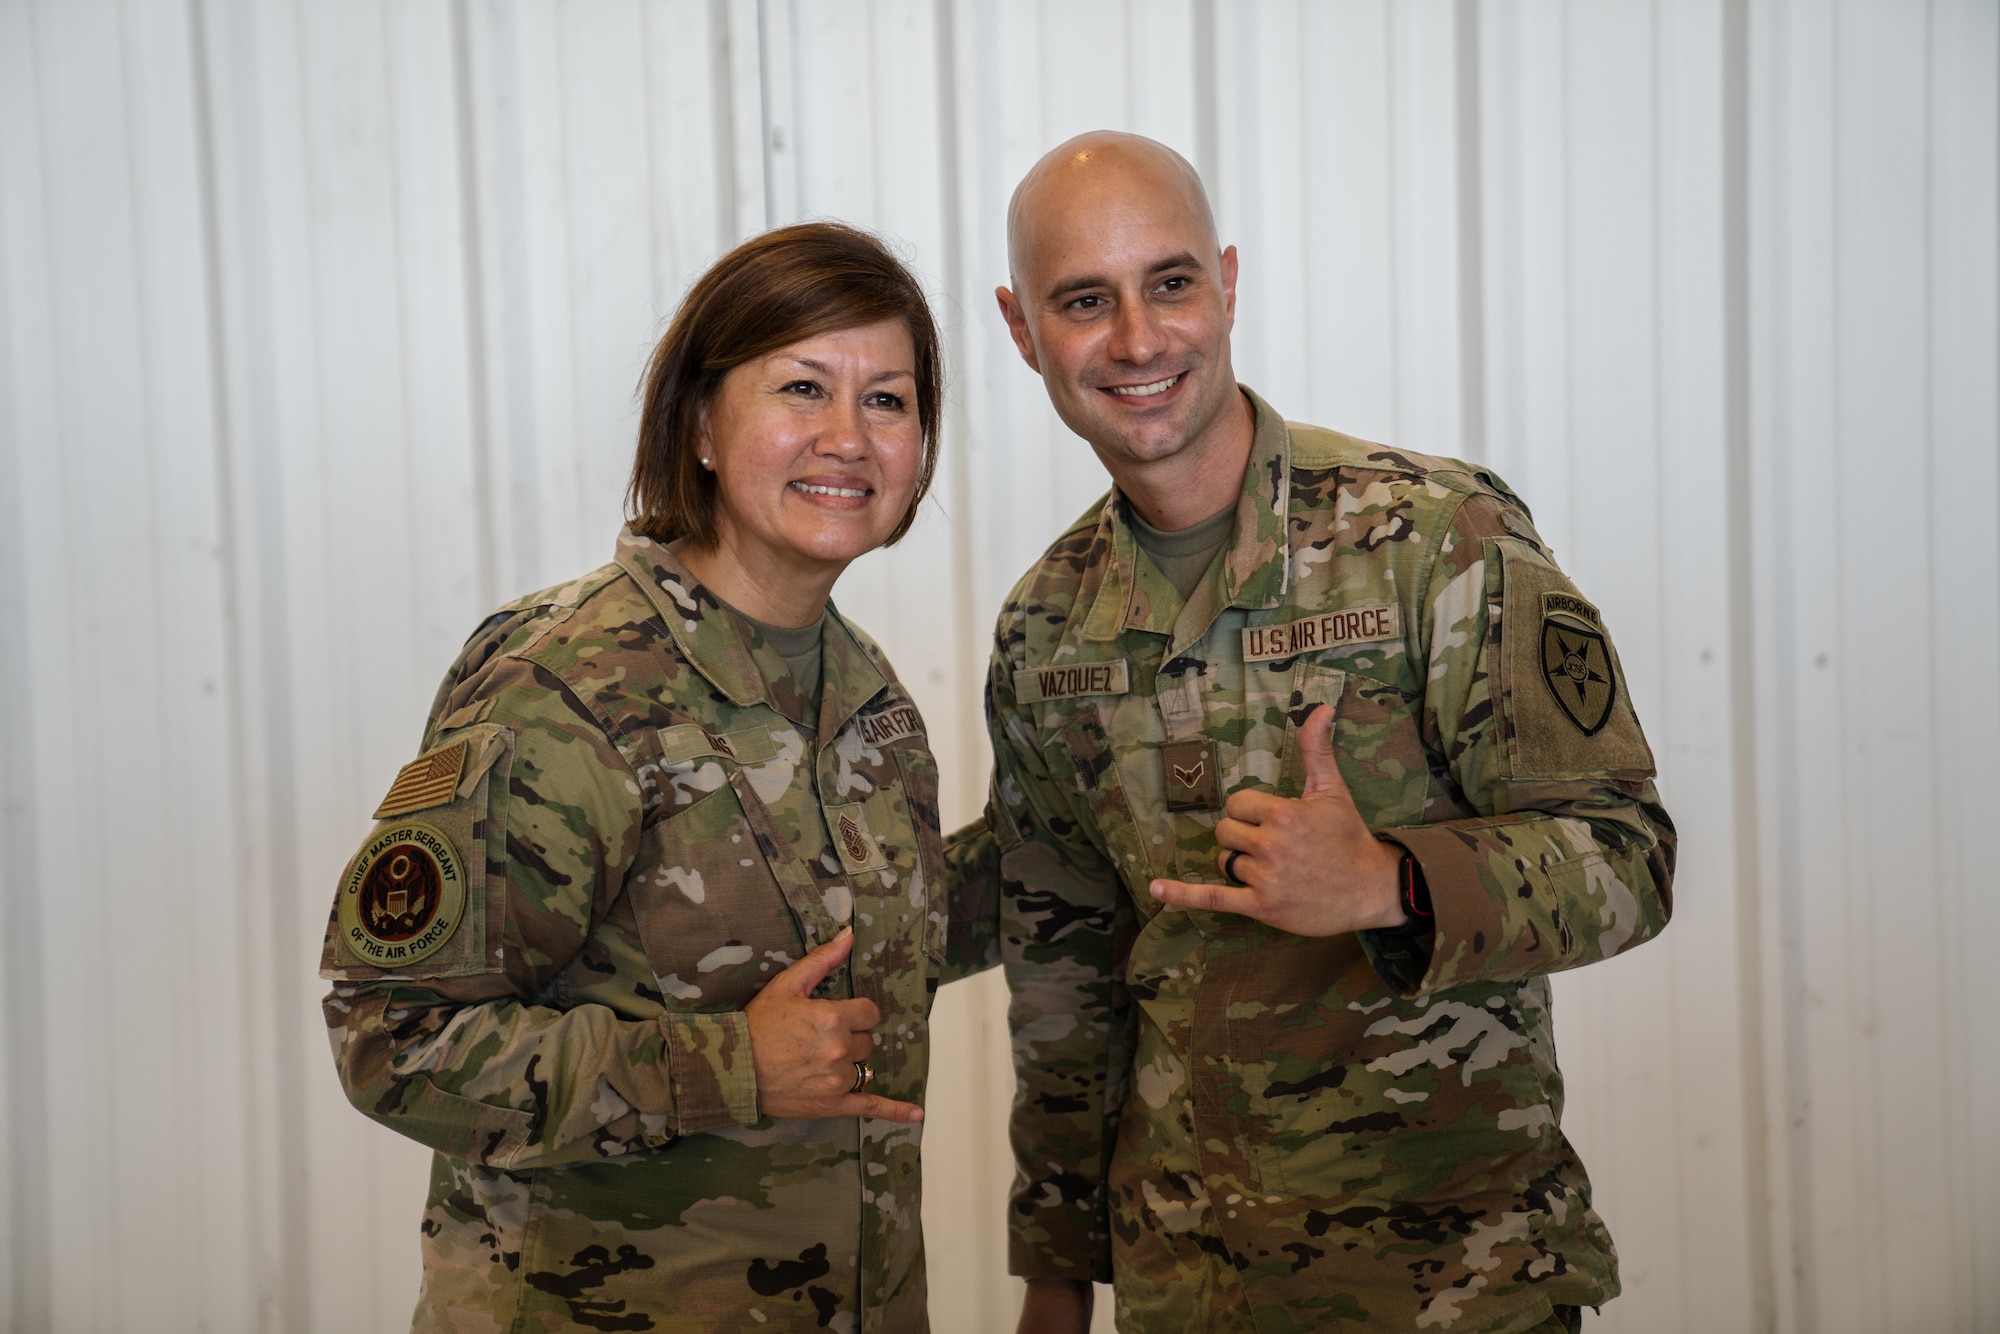 Chief Master Sgt. of the Air Force JoAnne S. Bass poses for a photo with Airman 1st Class Victor Vasquez, 6th Air Refueling Wing emergency action controller, at MacDill Air Force Base, Florida, Aug. 4, 2022.